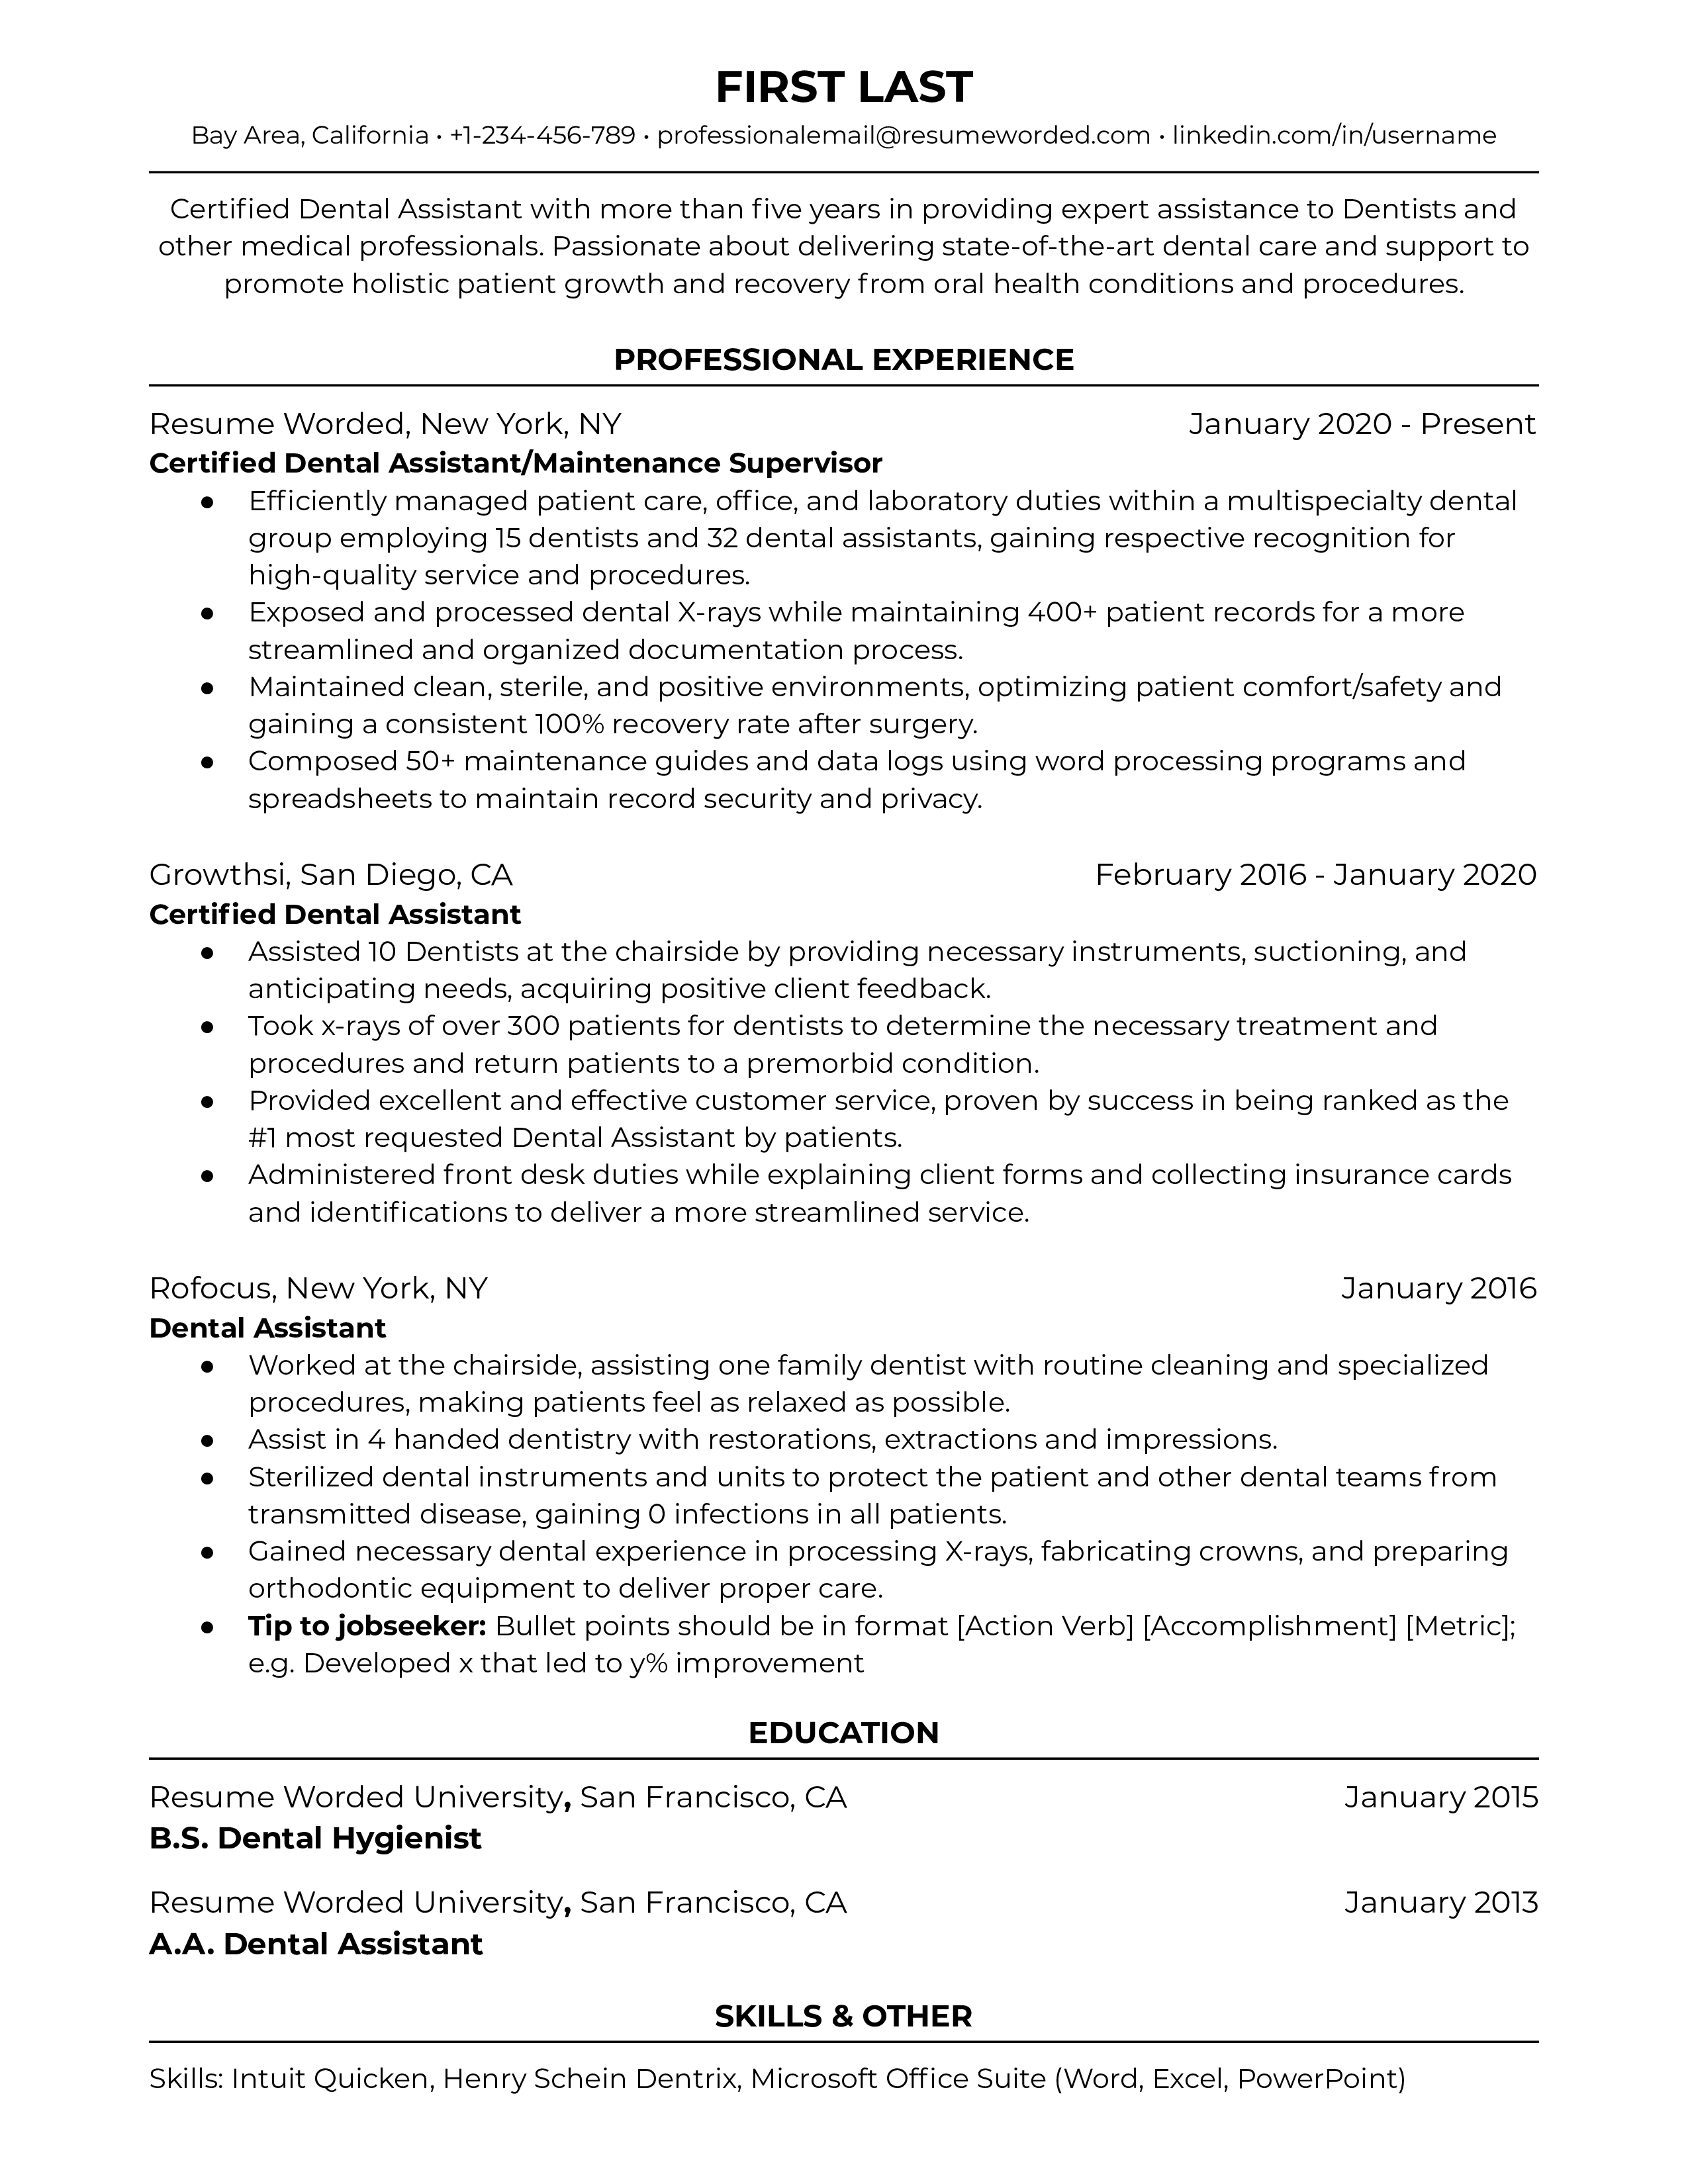 Certified Dental Assistant Resume Template + Example